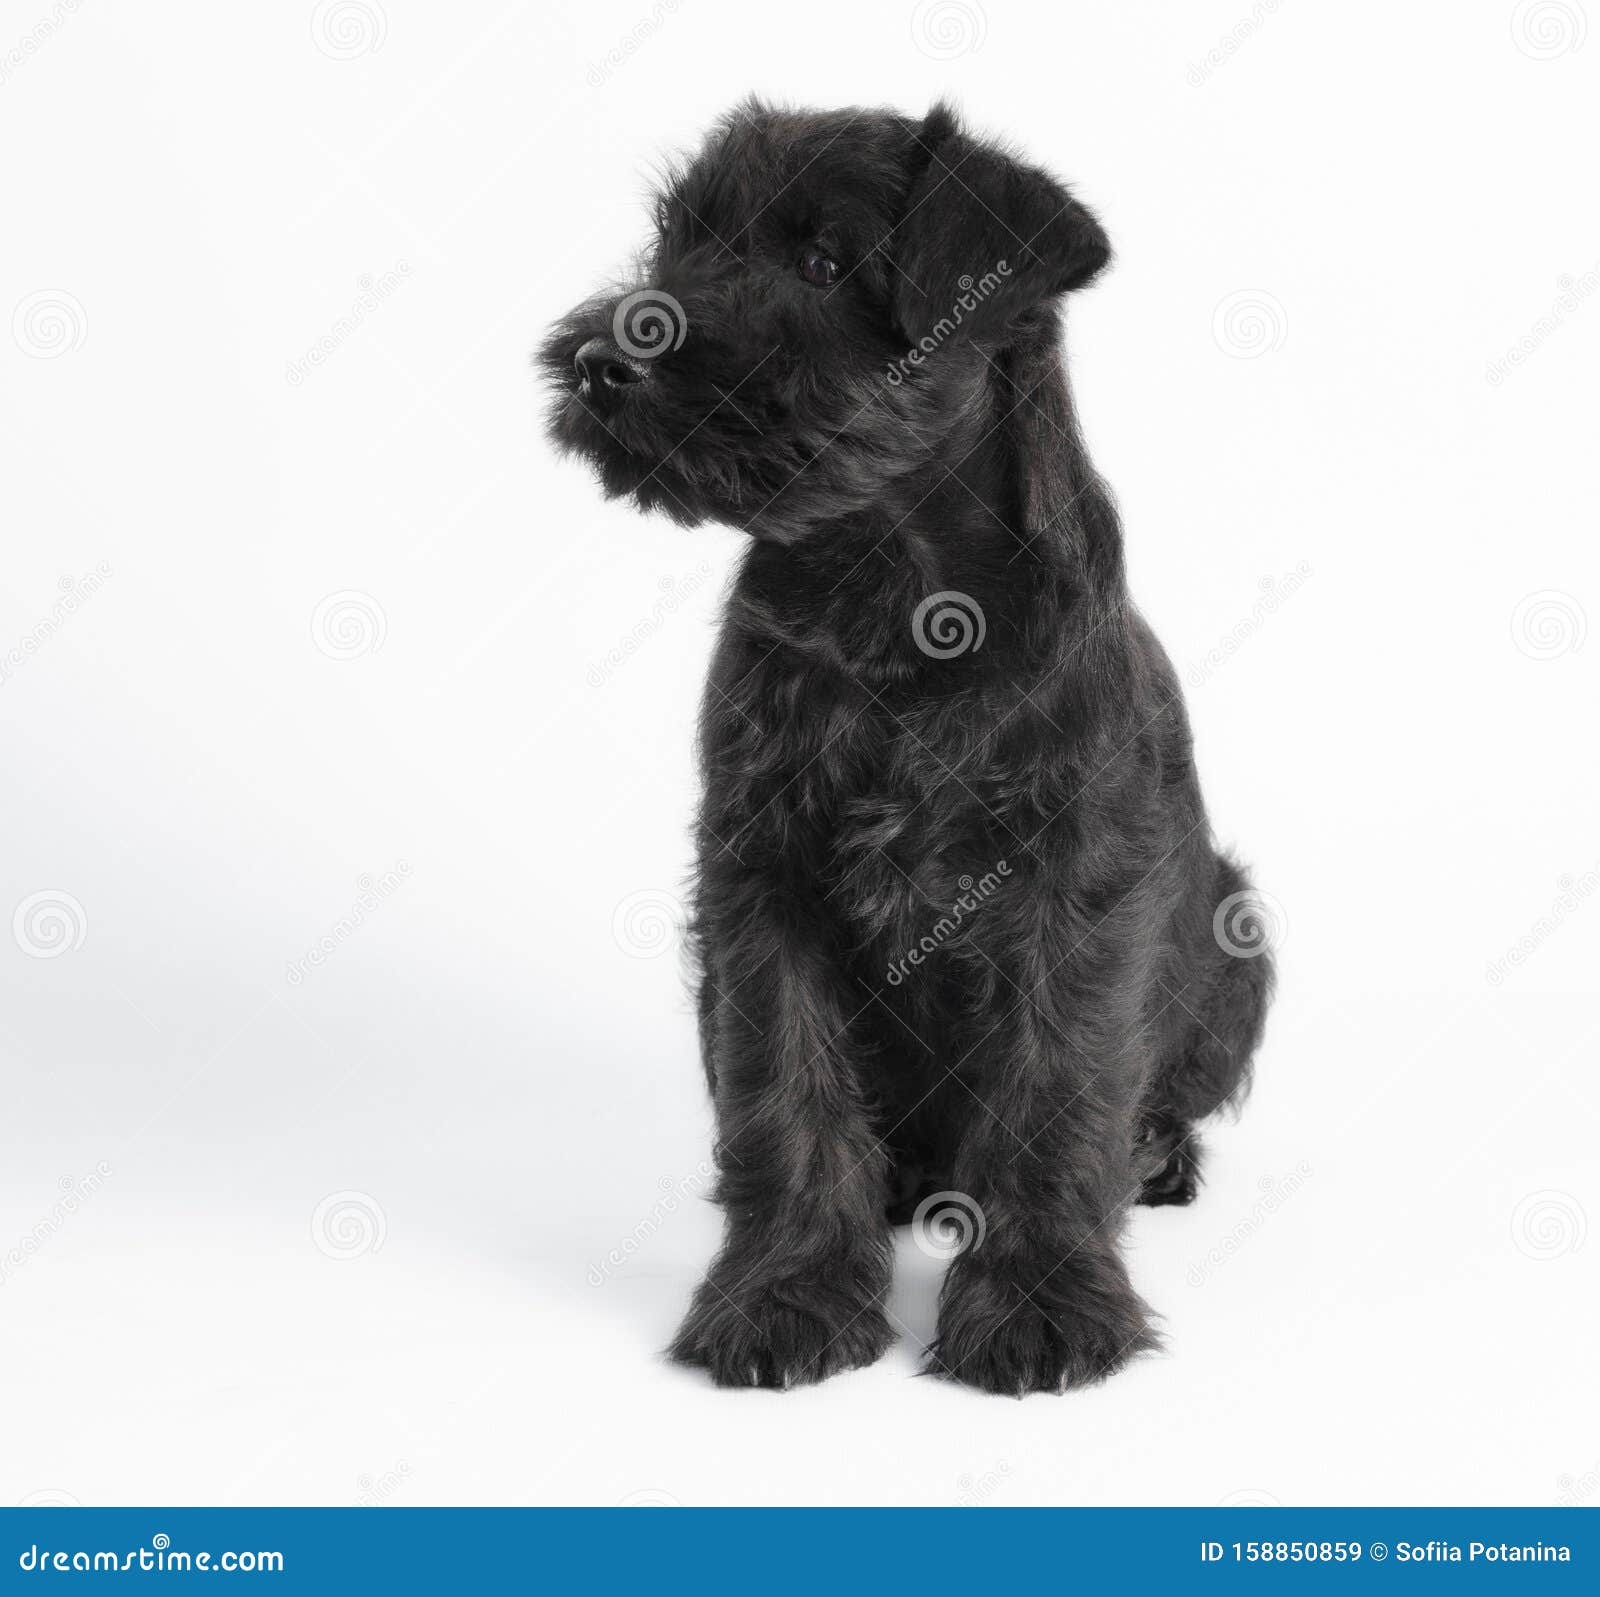 Little Black Puppy Breed Miniature Schnauzer On A White Background Close Up Isolated Stock Image Image Of Closeup Pedigree 158850859